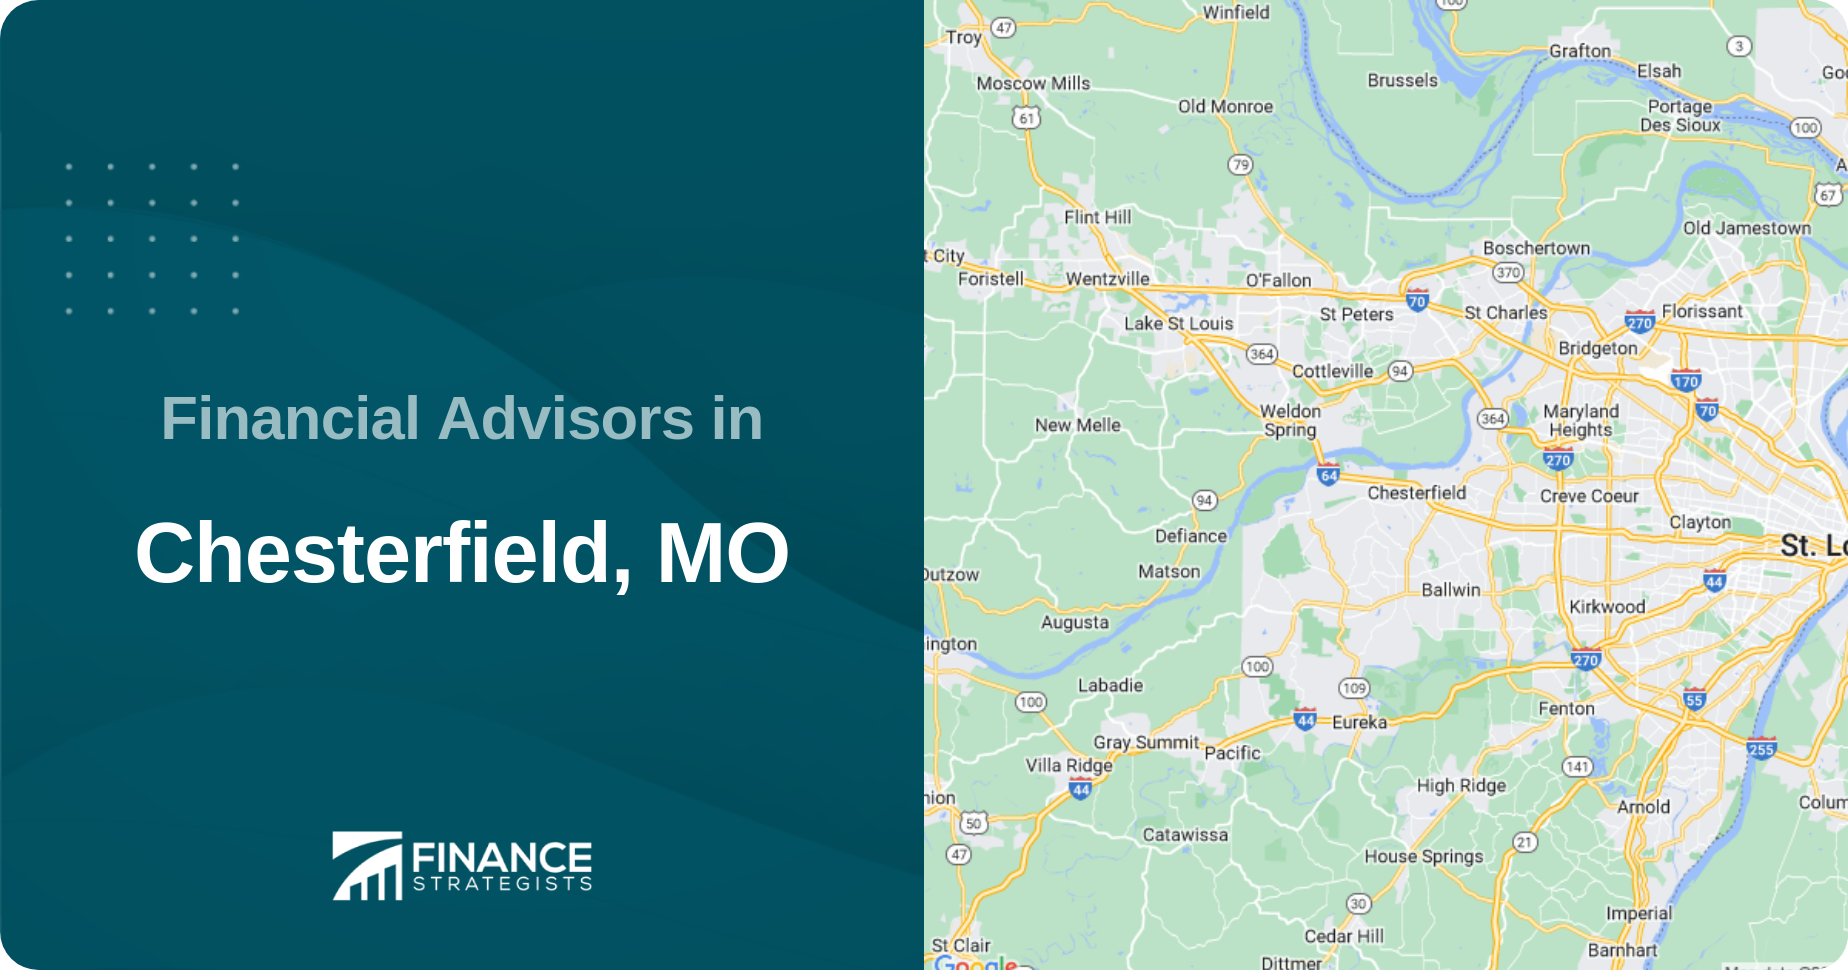 Financial Advisors in Chesterfield, MO